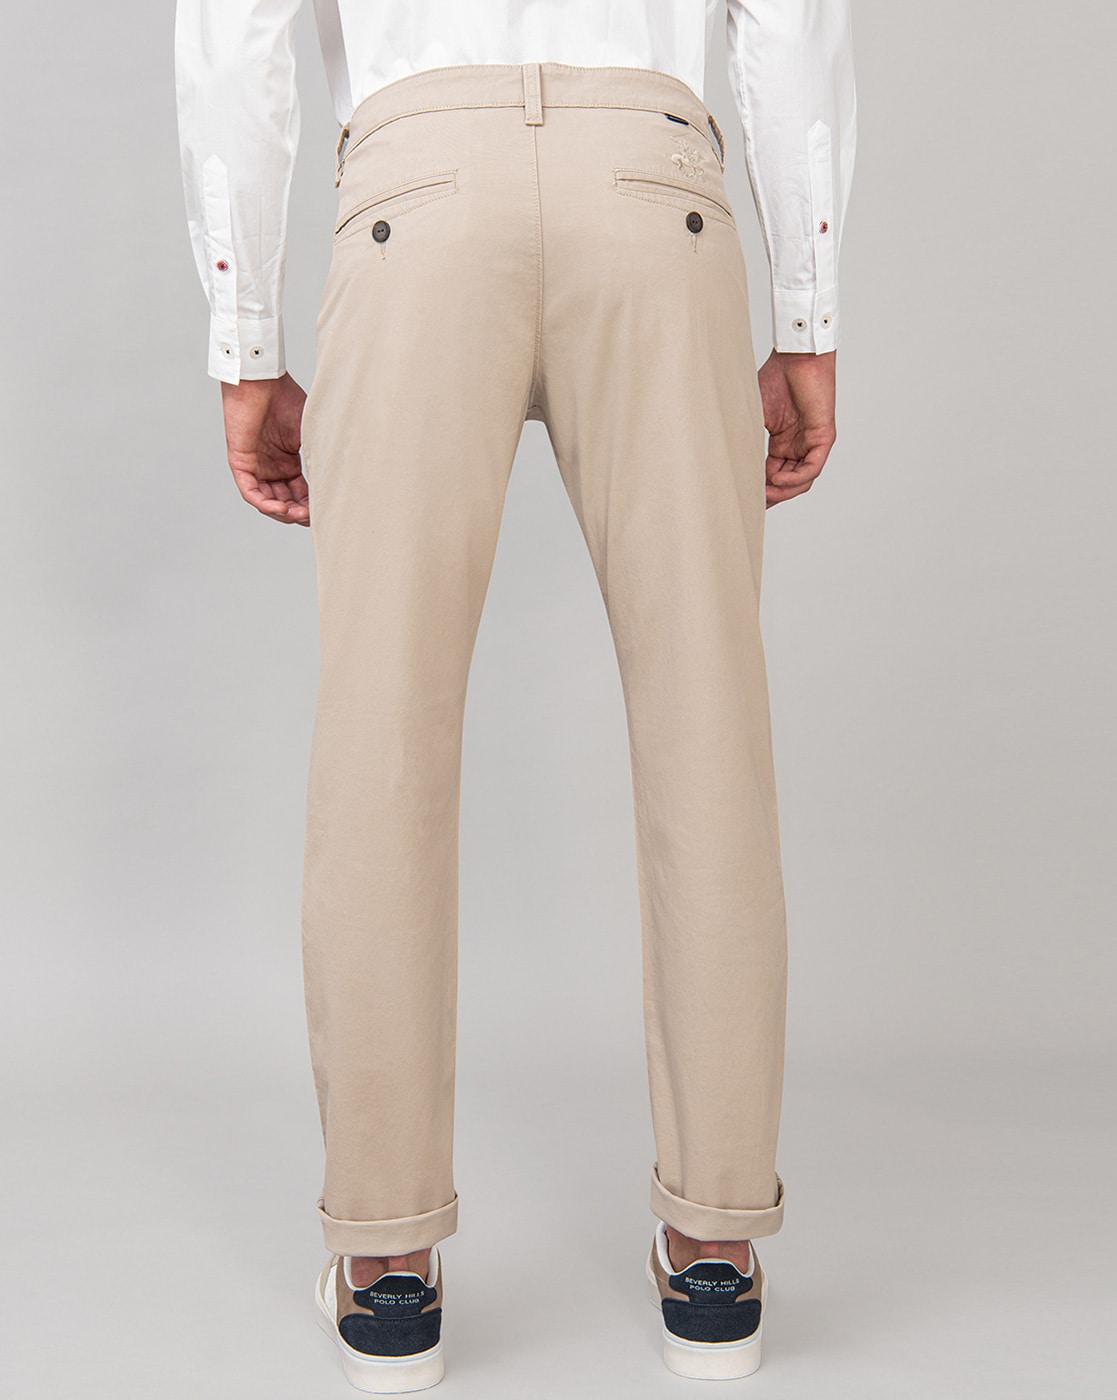 Trousers BEVERLY HILLS POLO CLUB Beige size 34 UK  US in Cotton  30628672